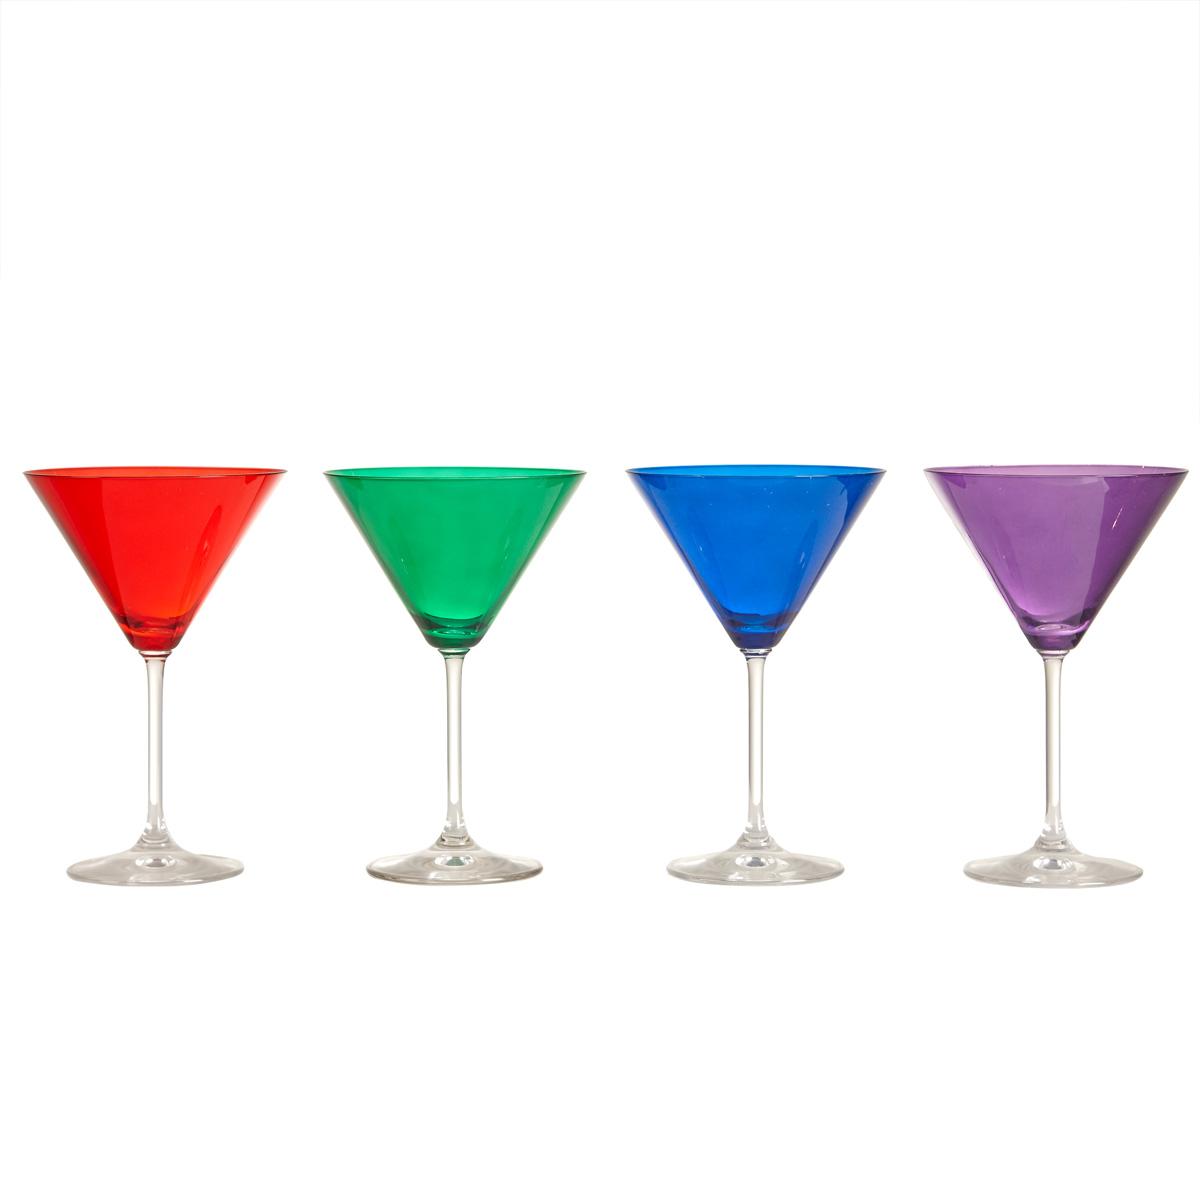 A Set of Four Waterford Crystal Coloured Martini Glasses - Price Estimate: $400 - $600